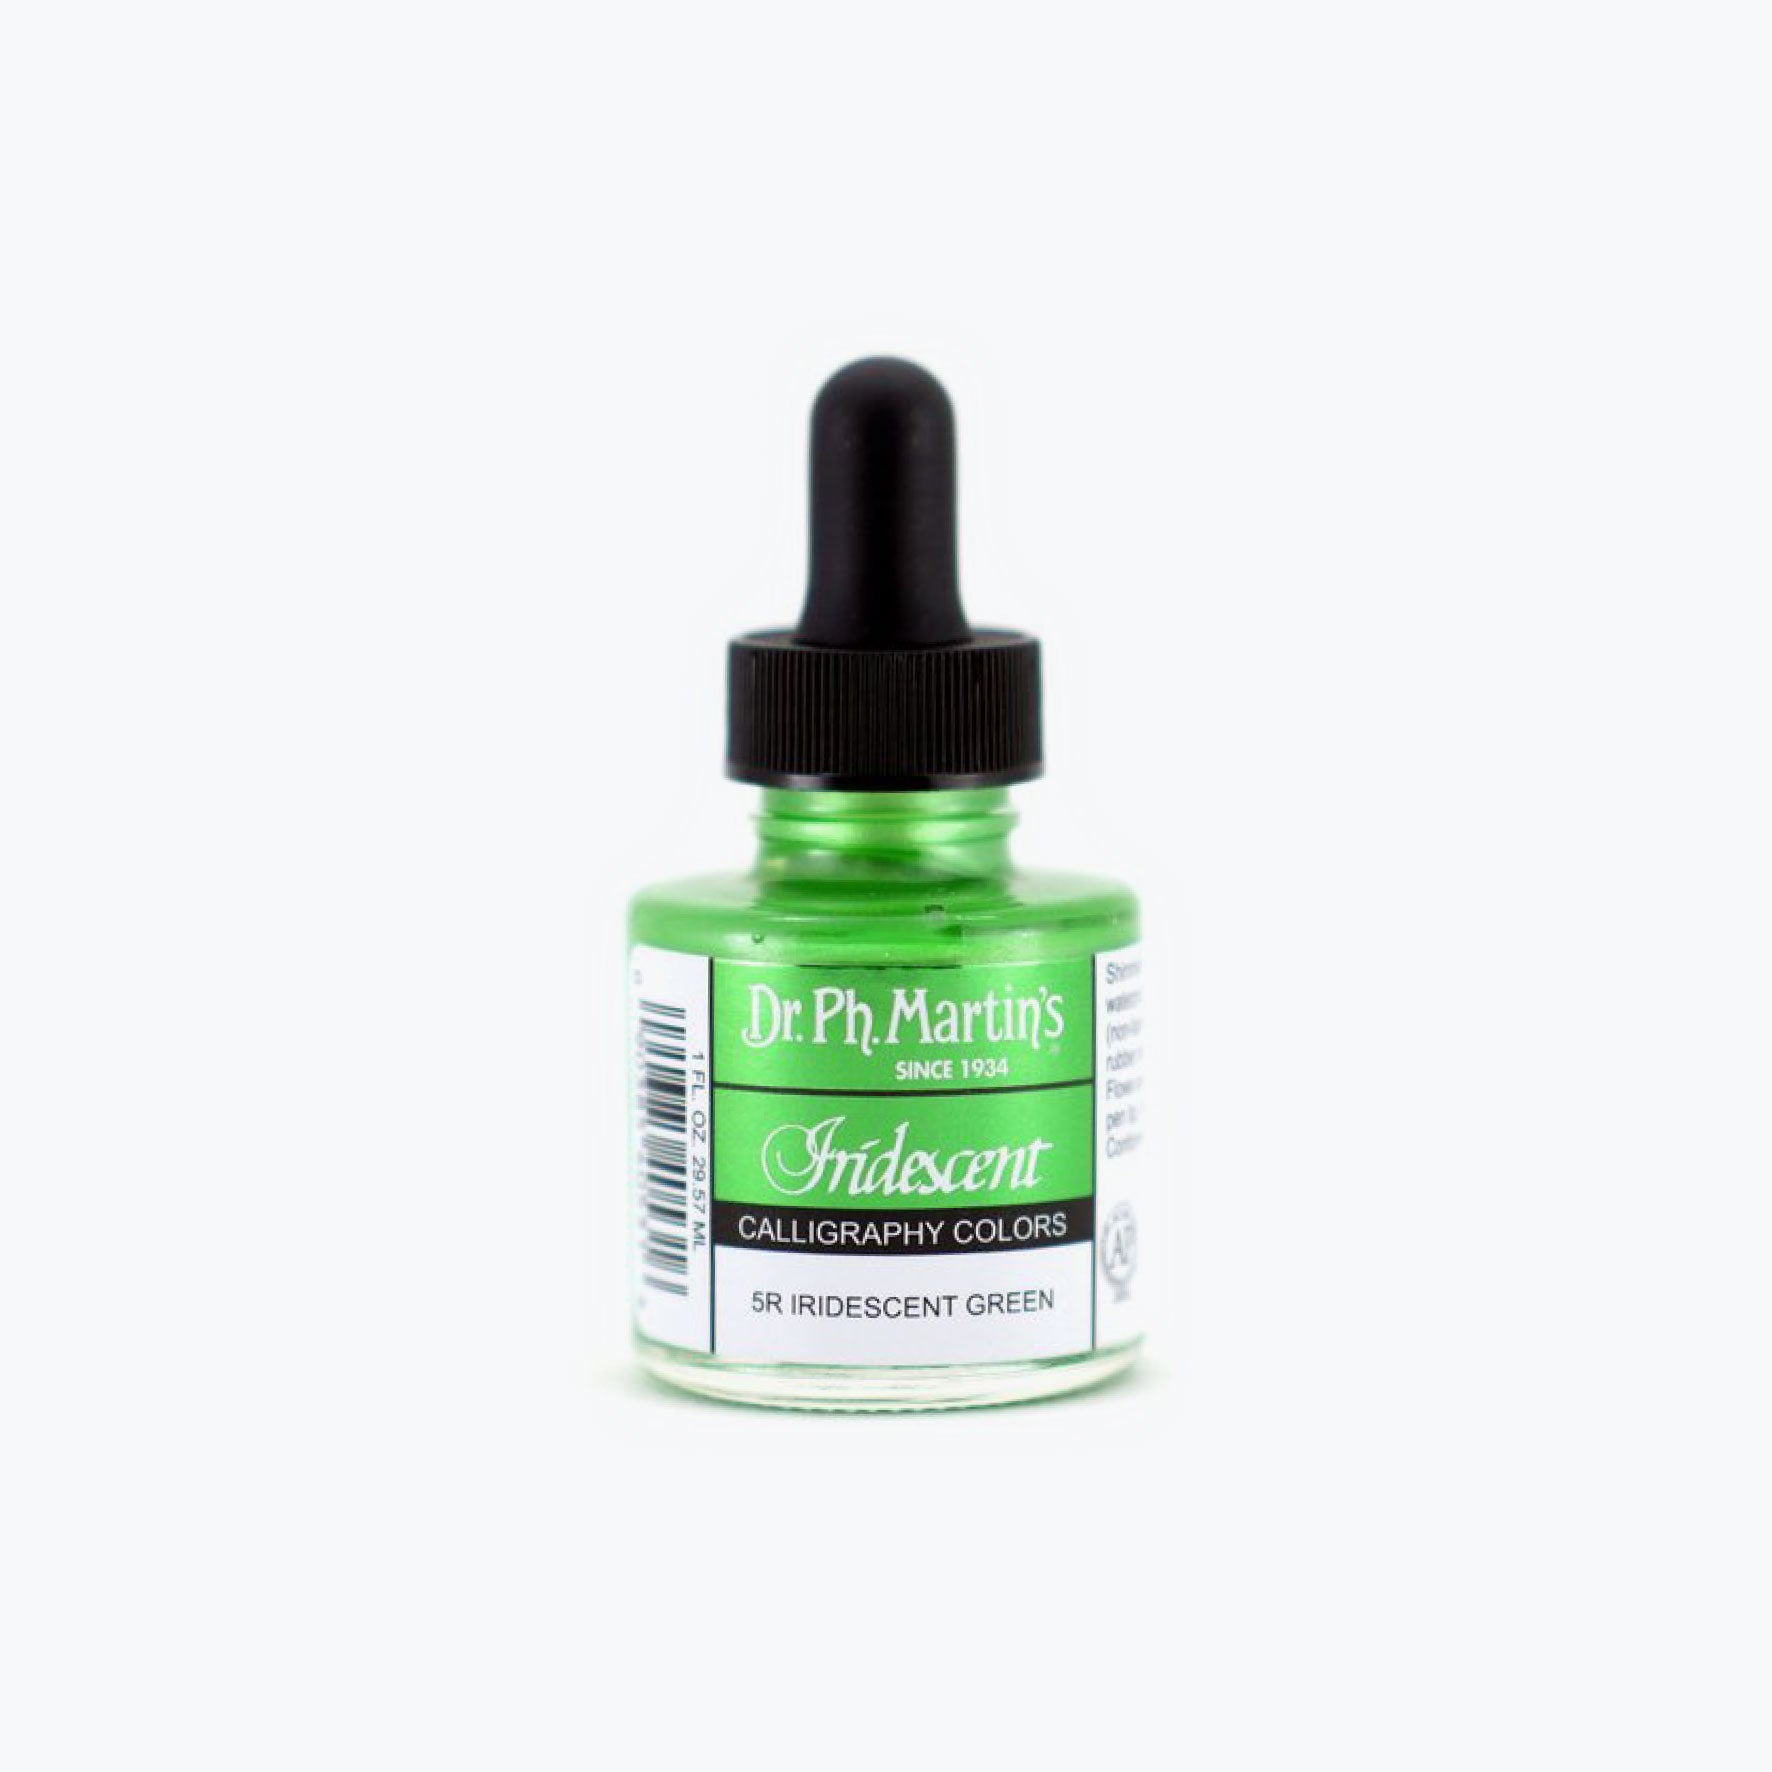 Dr. Ph. Martin's - Calligraphy Ink - Iridescent - Green (5R)